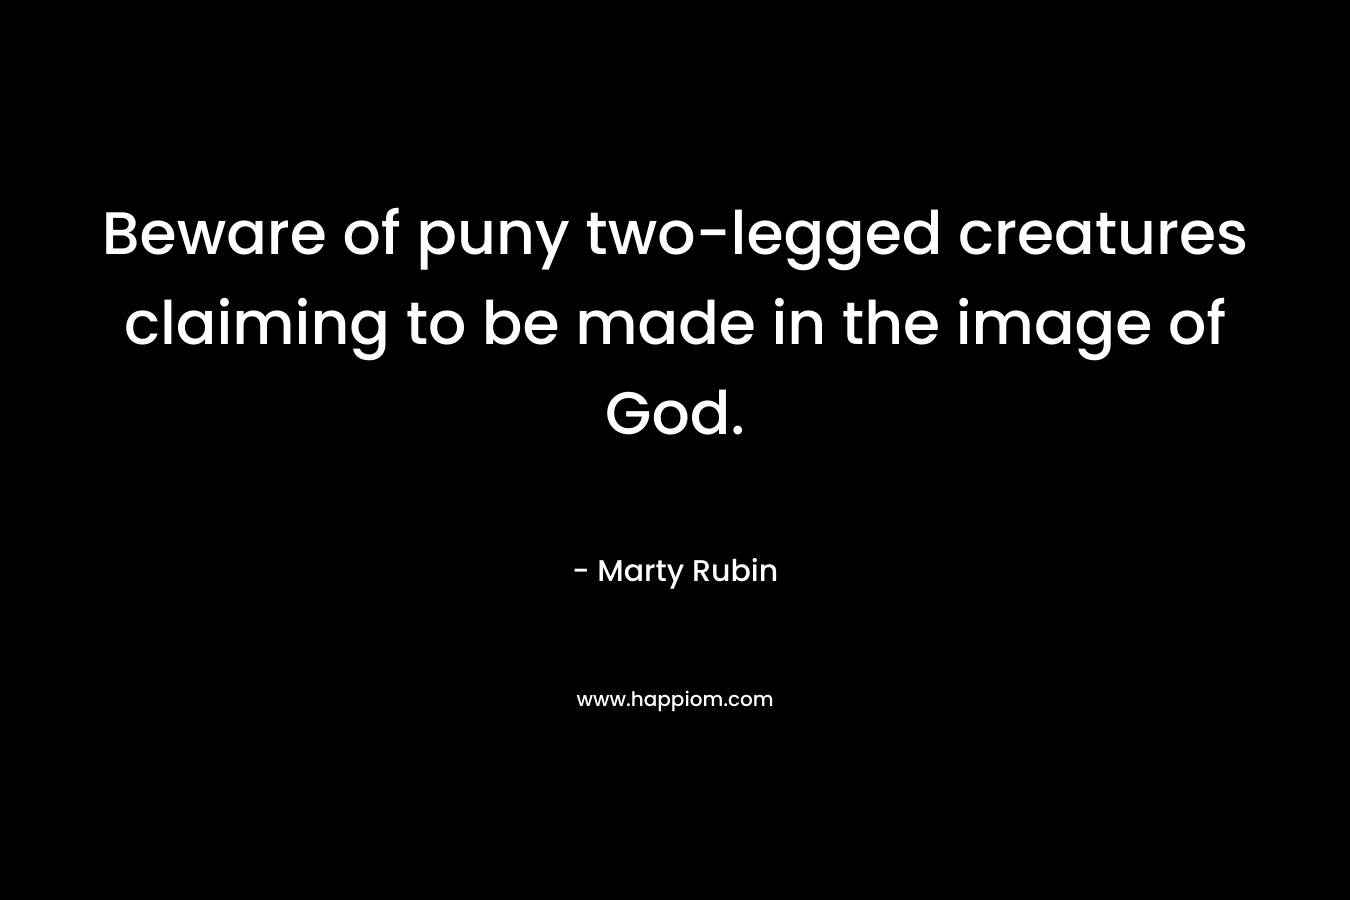 Beware of puny two-legged creatures claiming to be made in the image of God. – Marty Rubin